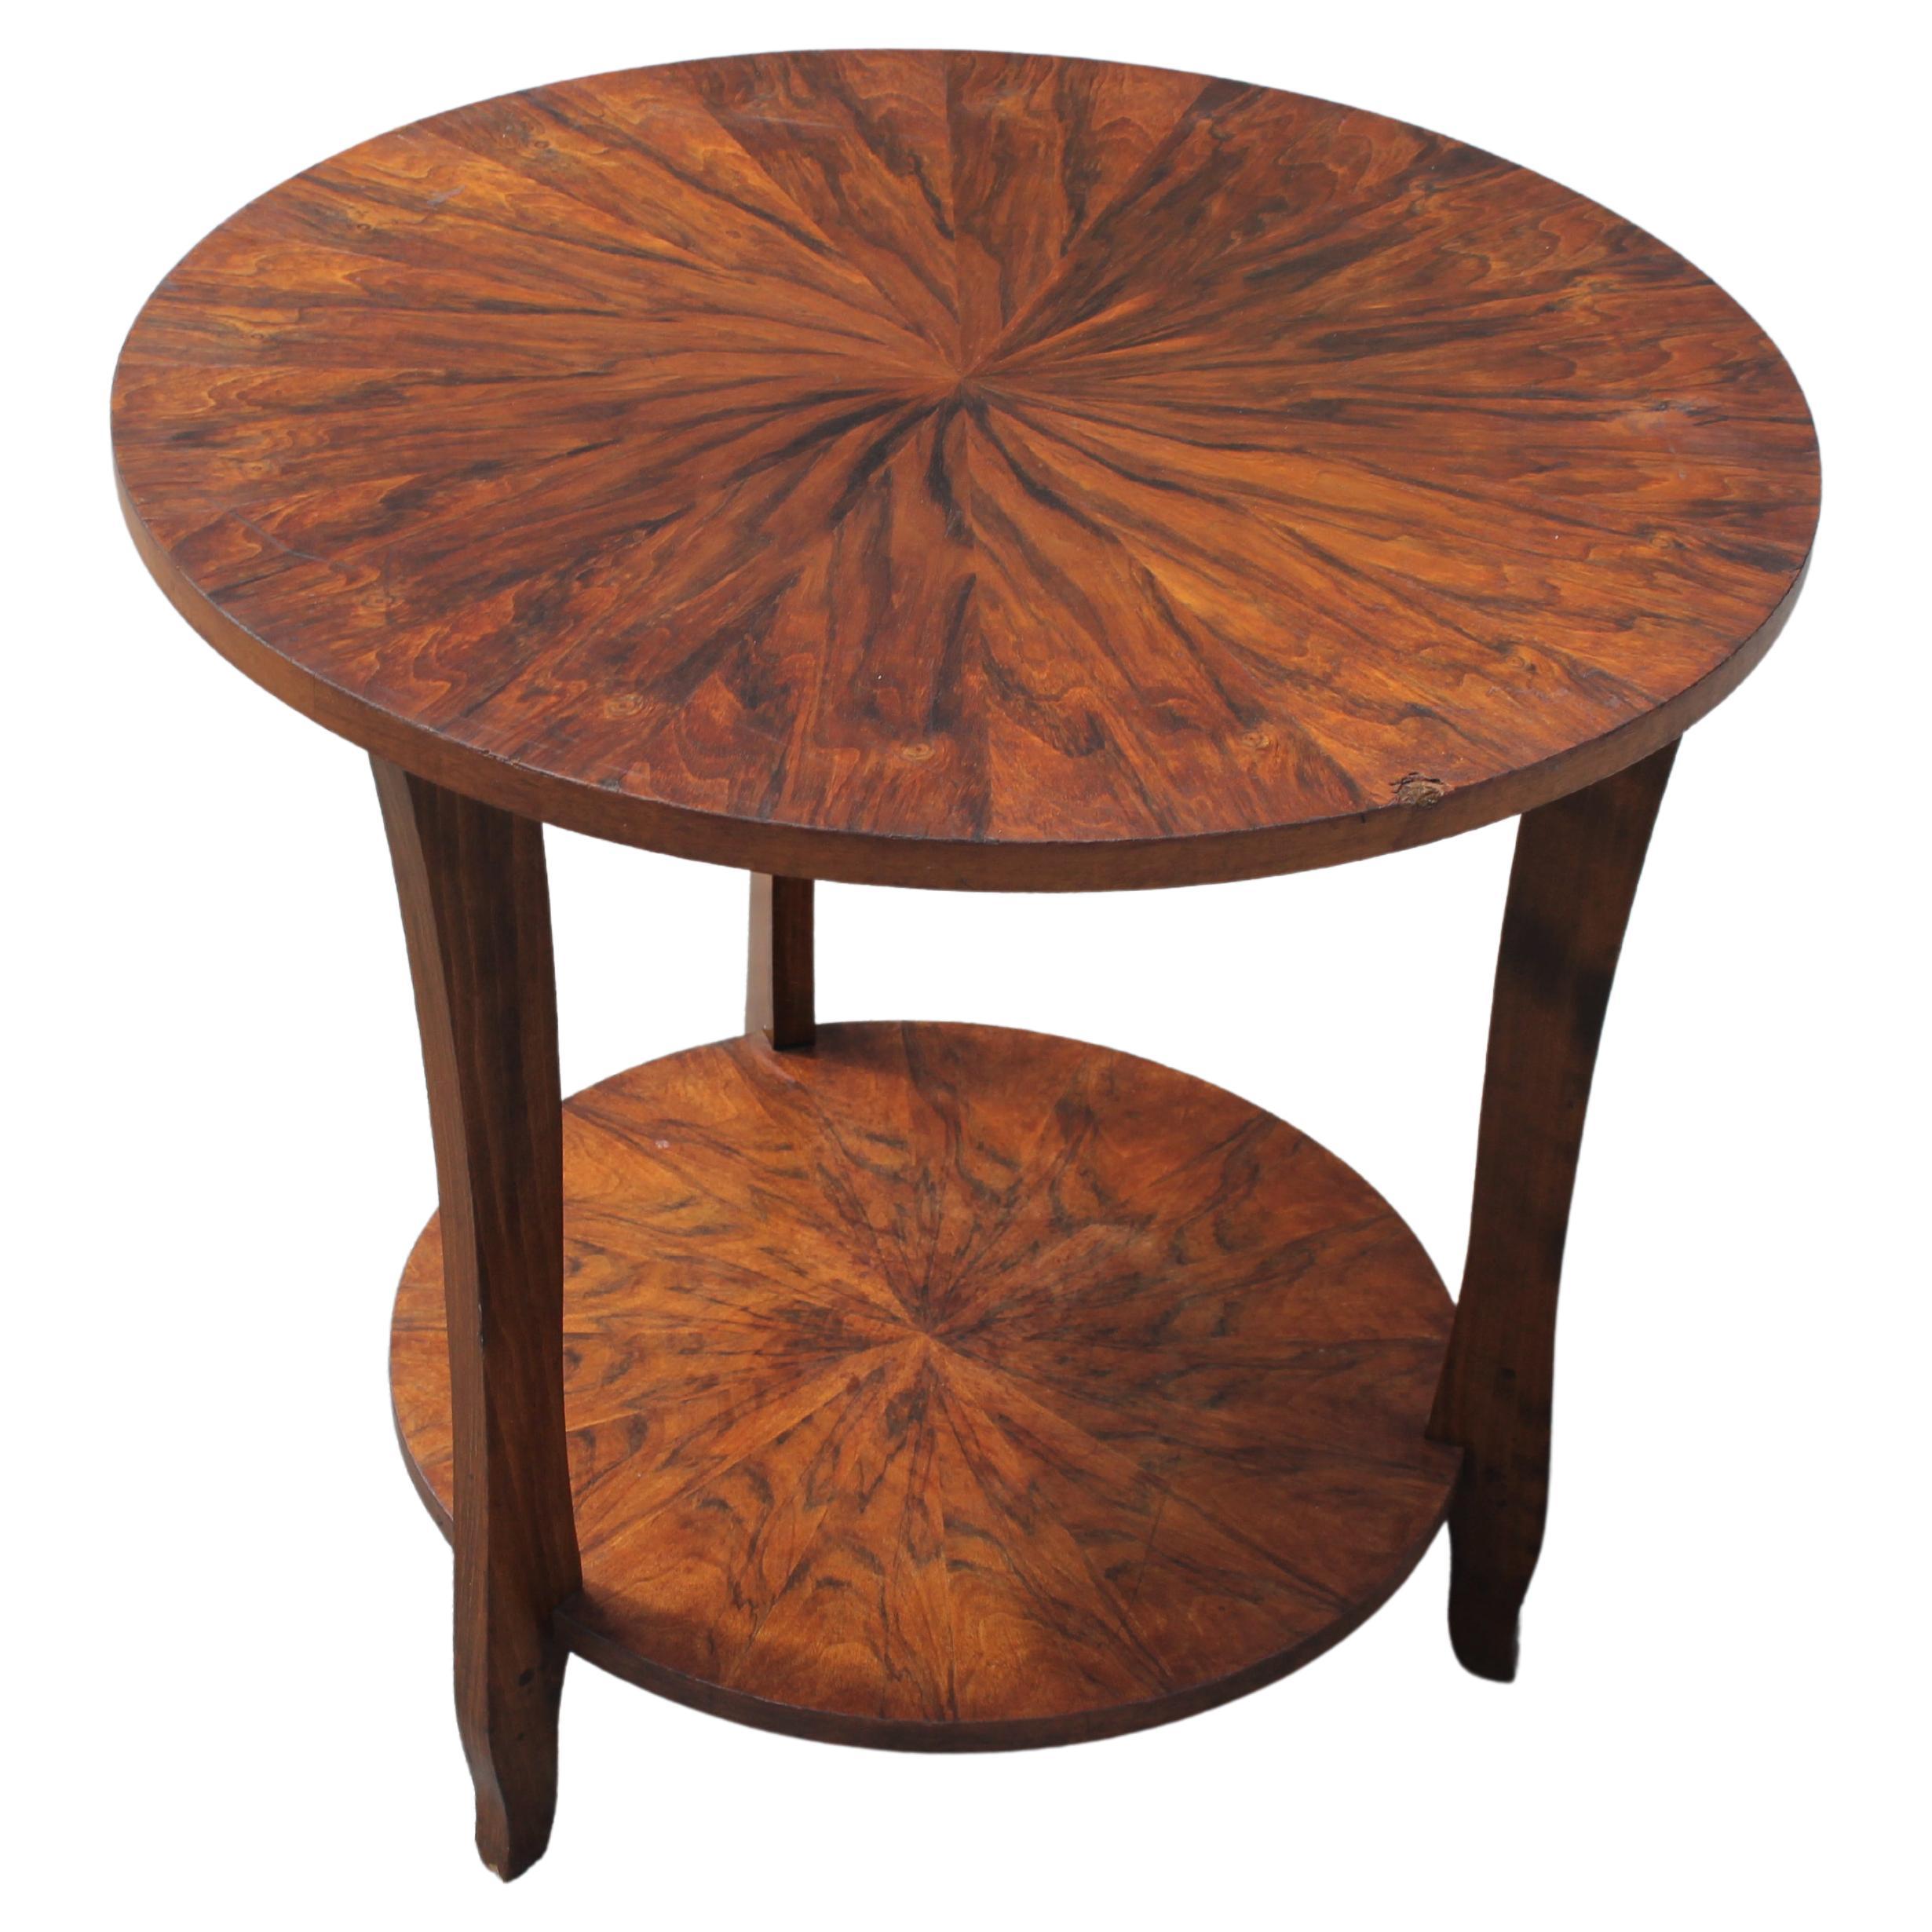 1930's French Art Deco Round Exotic Walnut Side Table/ Accent Table